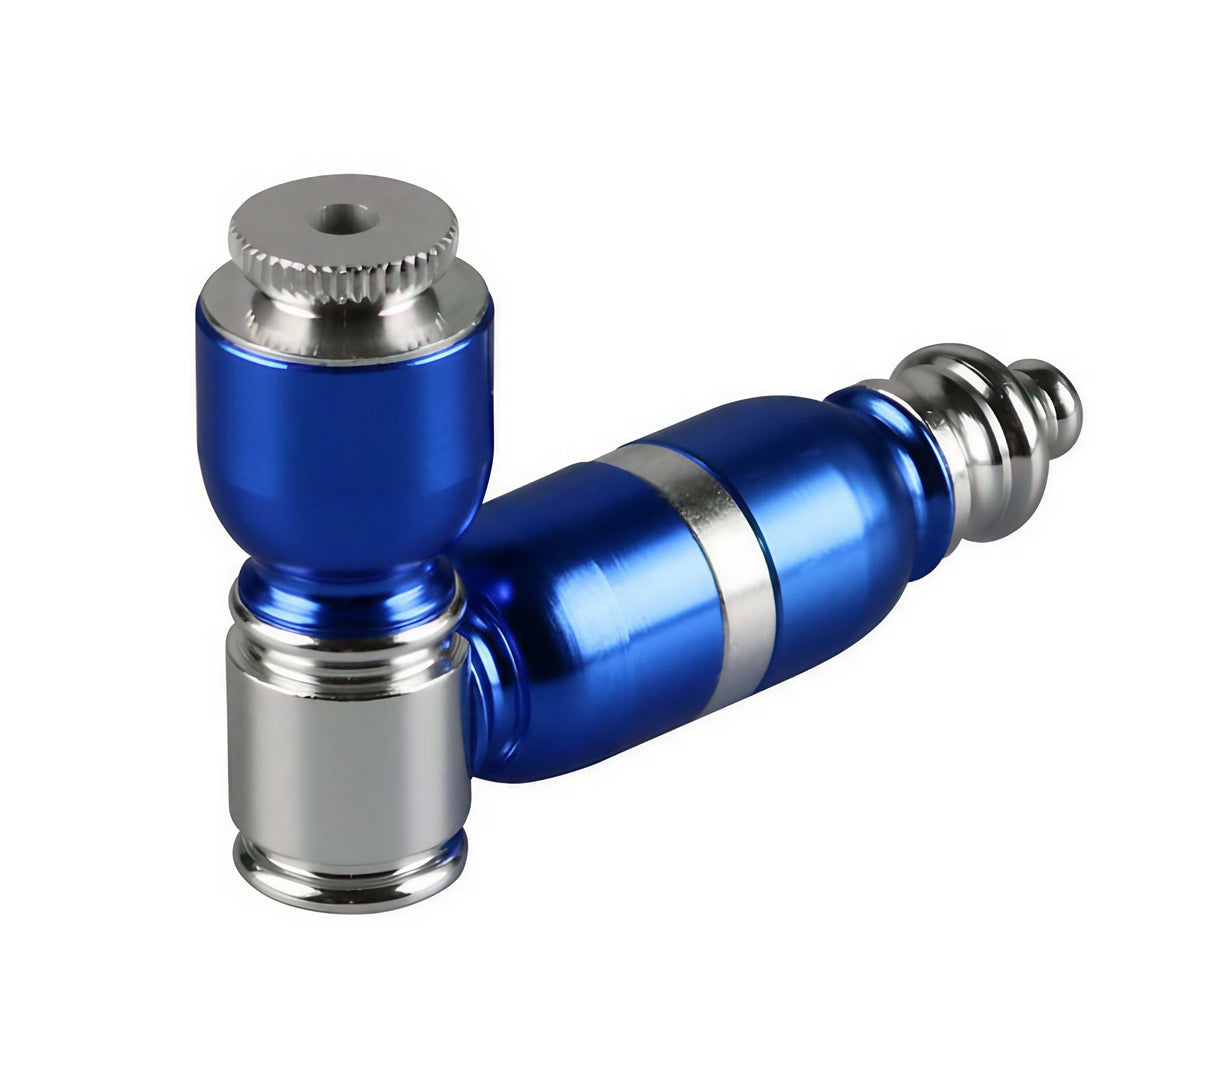 Compact blue and silver 3" portable metal hand pipe, easy for discreet use and travel